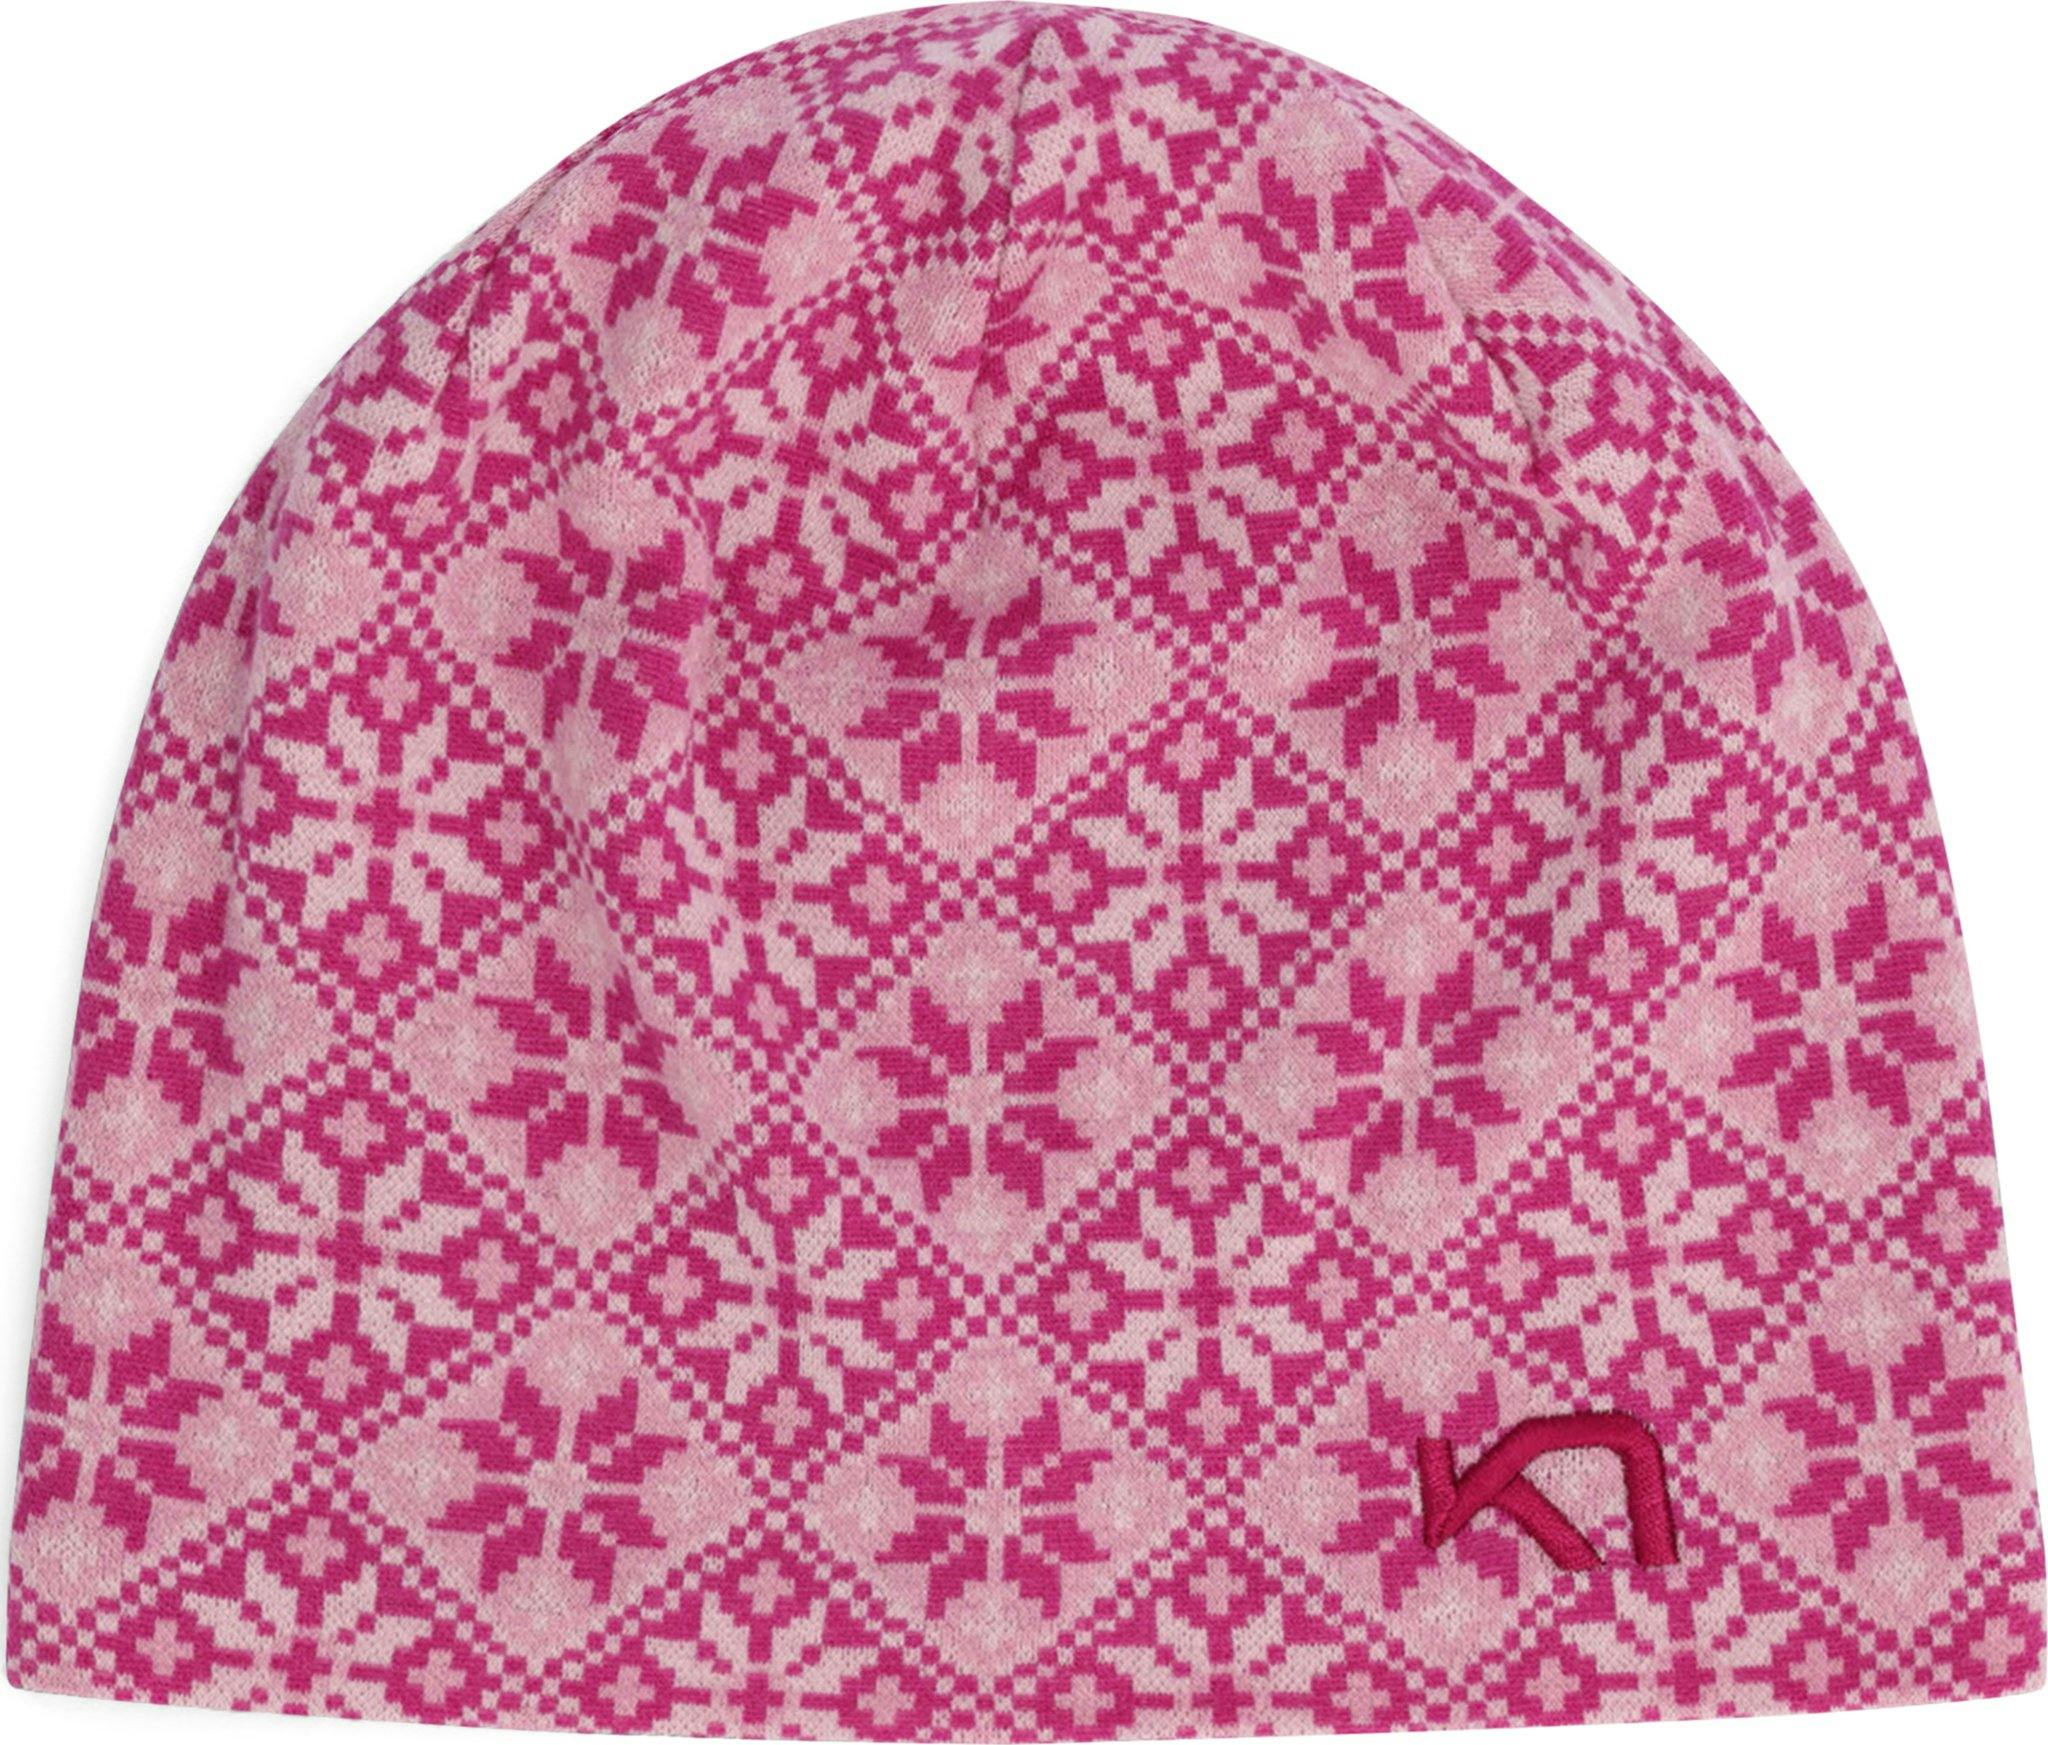 Product image for Rose Beanie - Women's